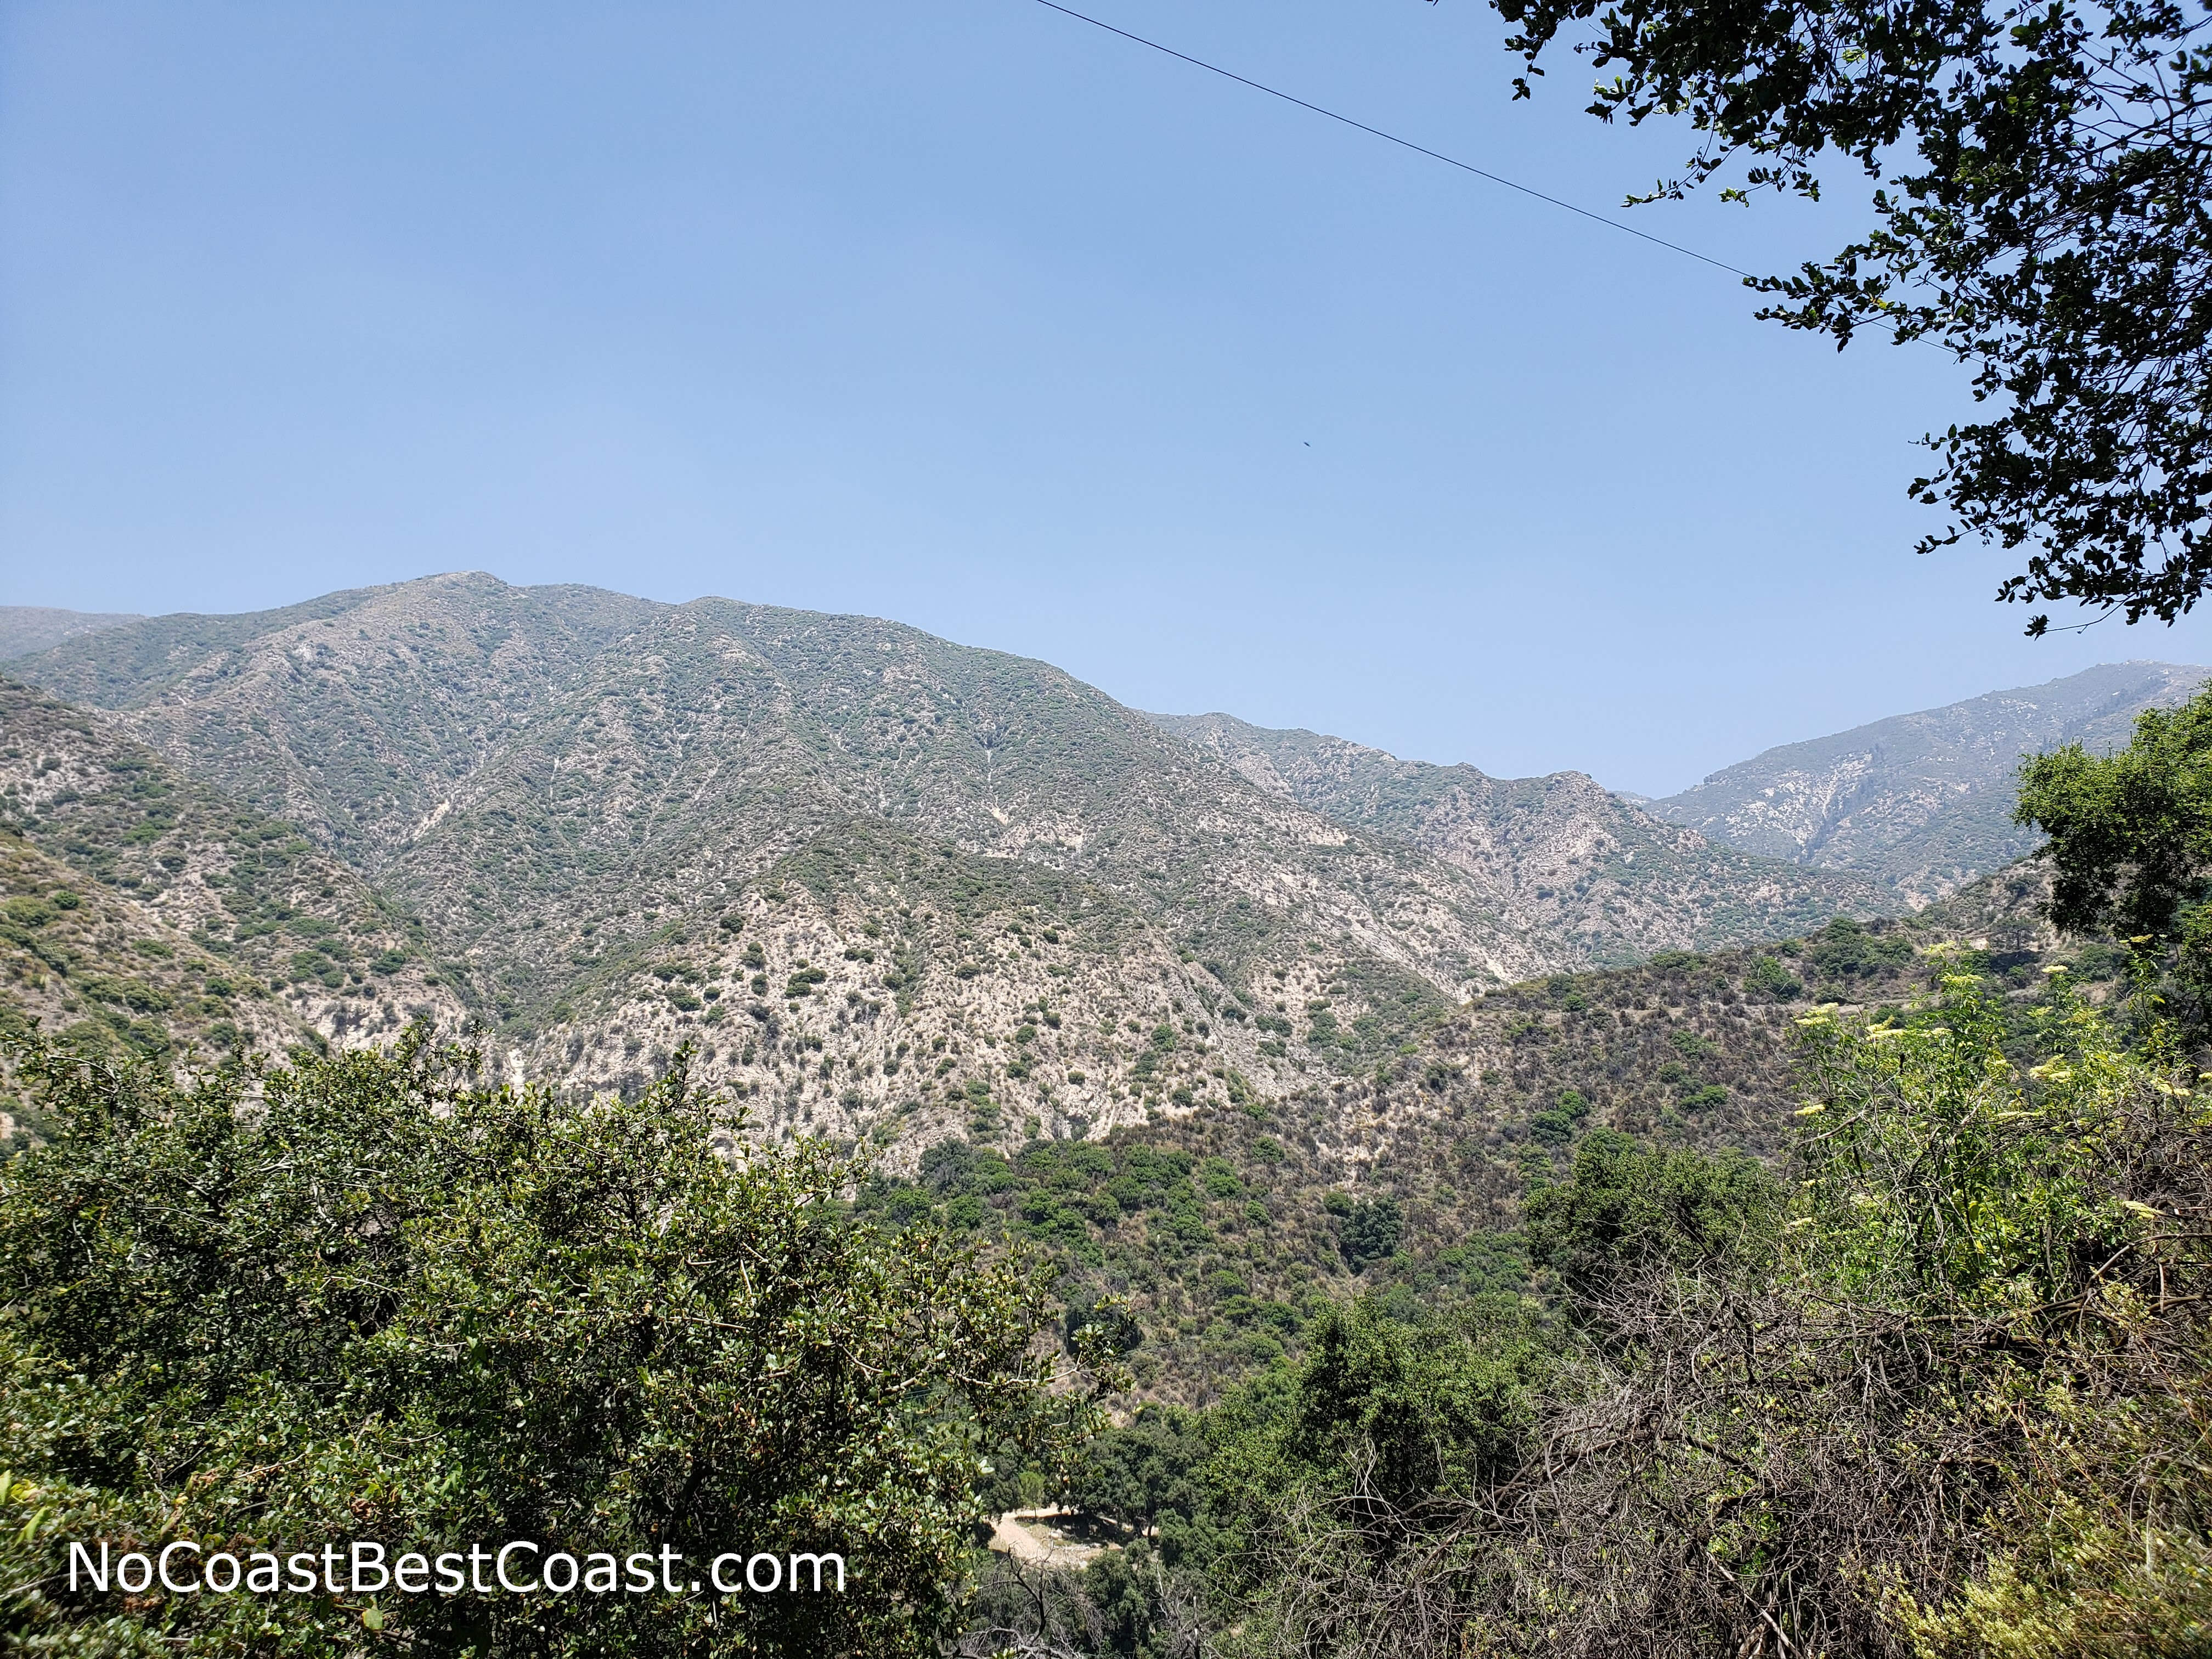 Brown Mountain and the San Gabriel Mountains from the trail